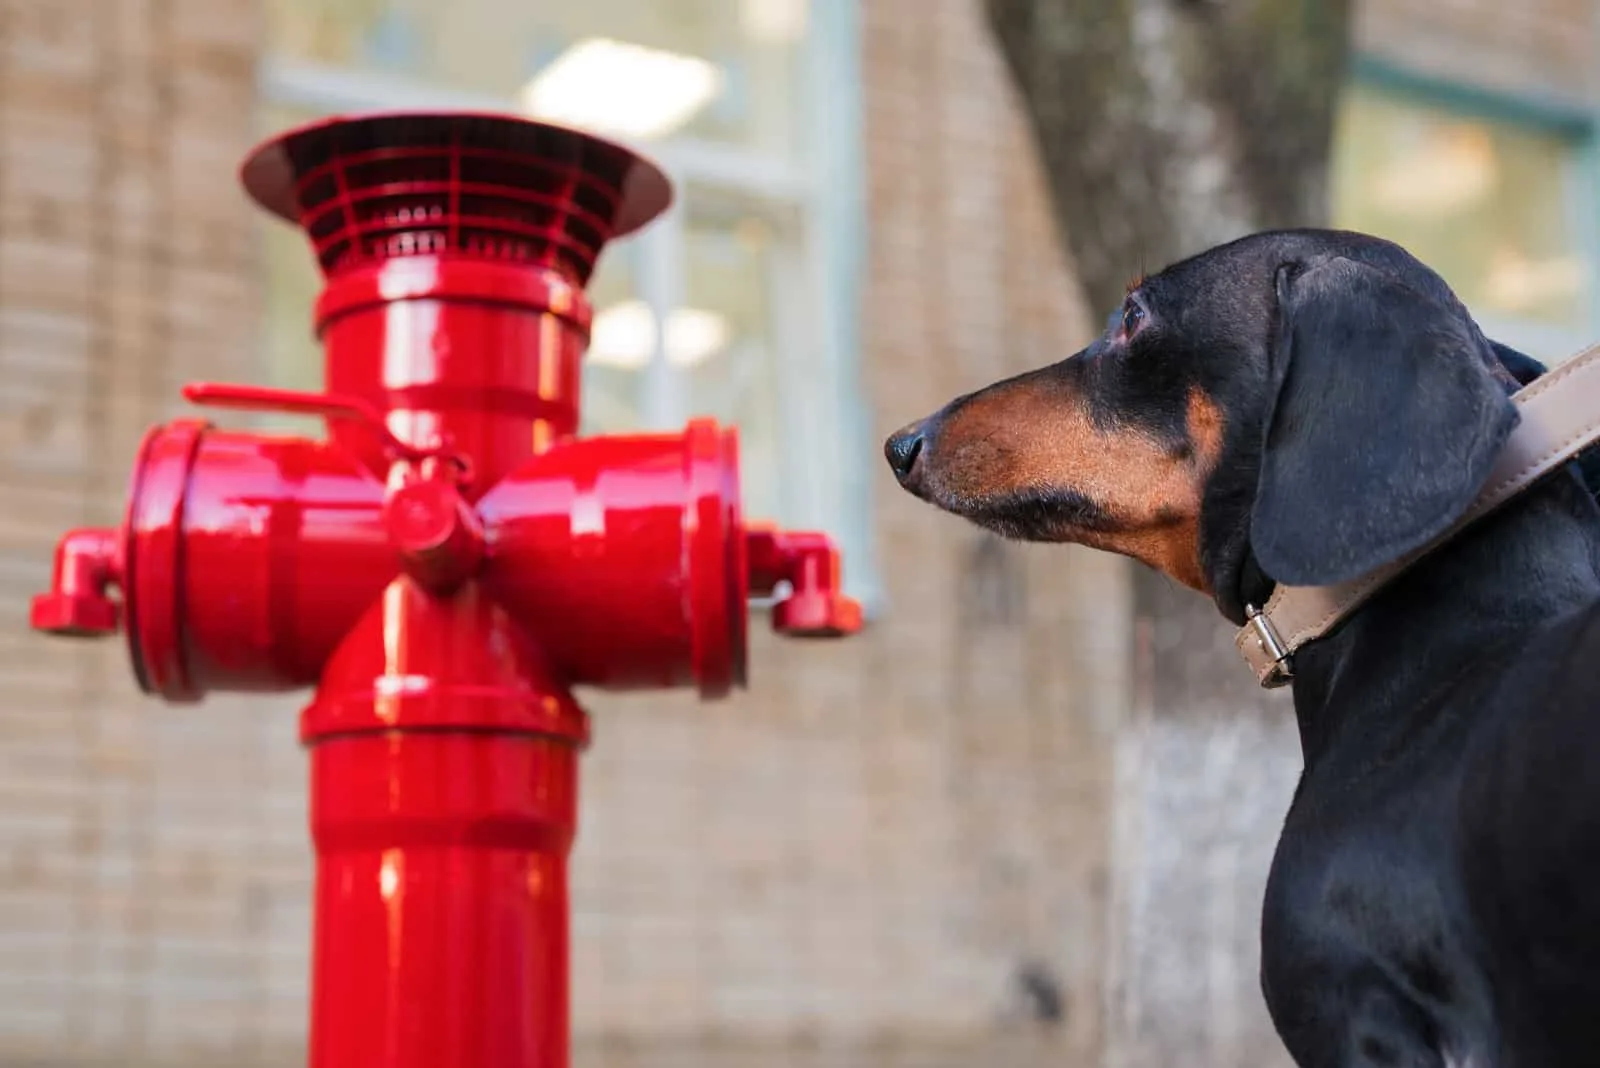 dachshund looking at a red fire hydrant